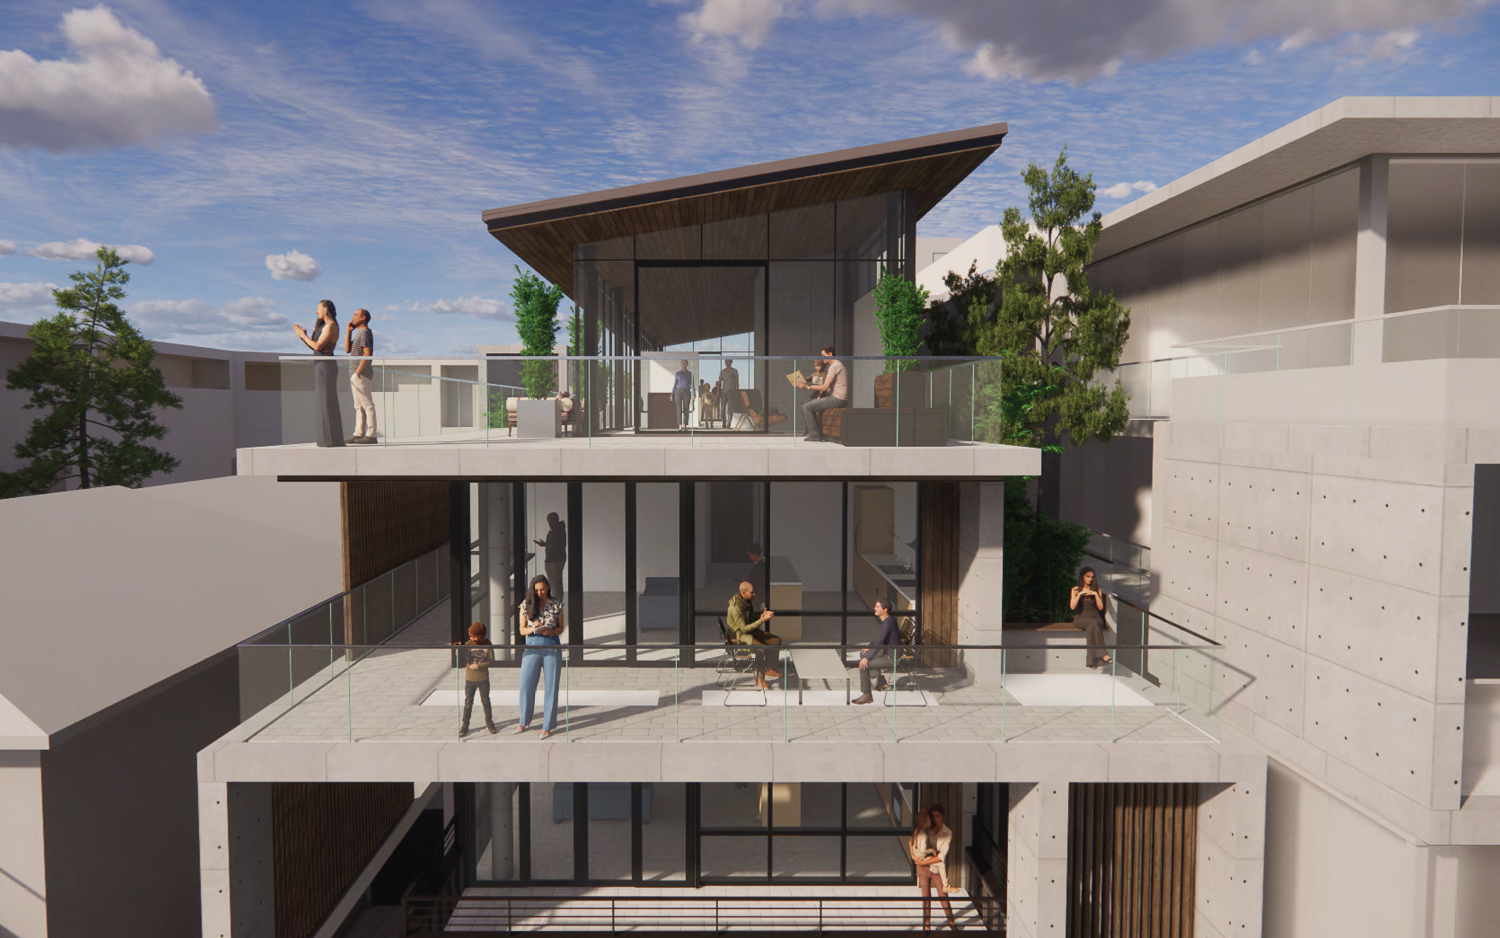 640 Waverley Street residential terrace, rendering by Hayes Group Architects